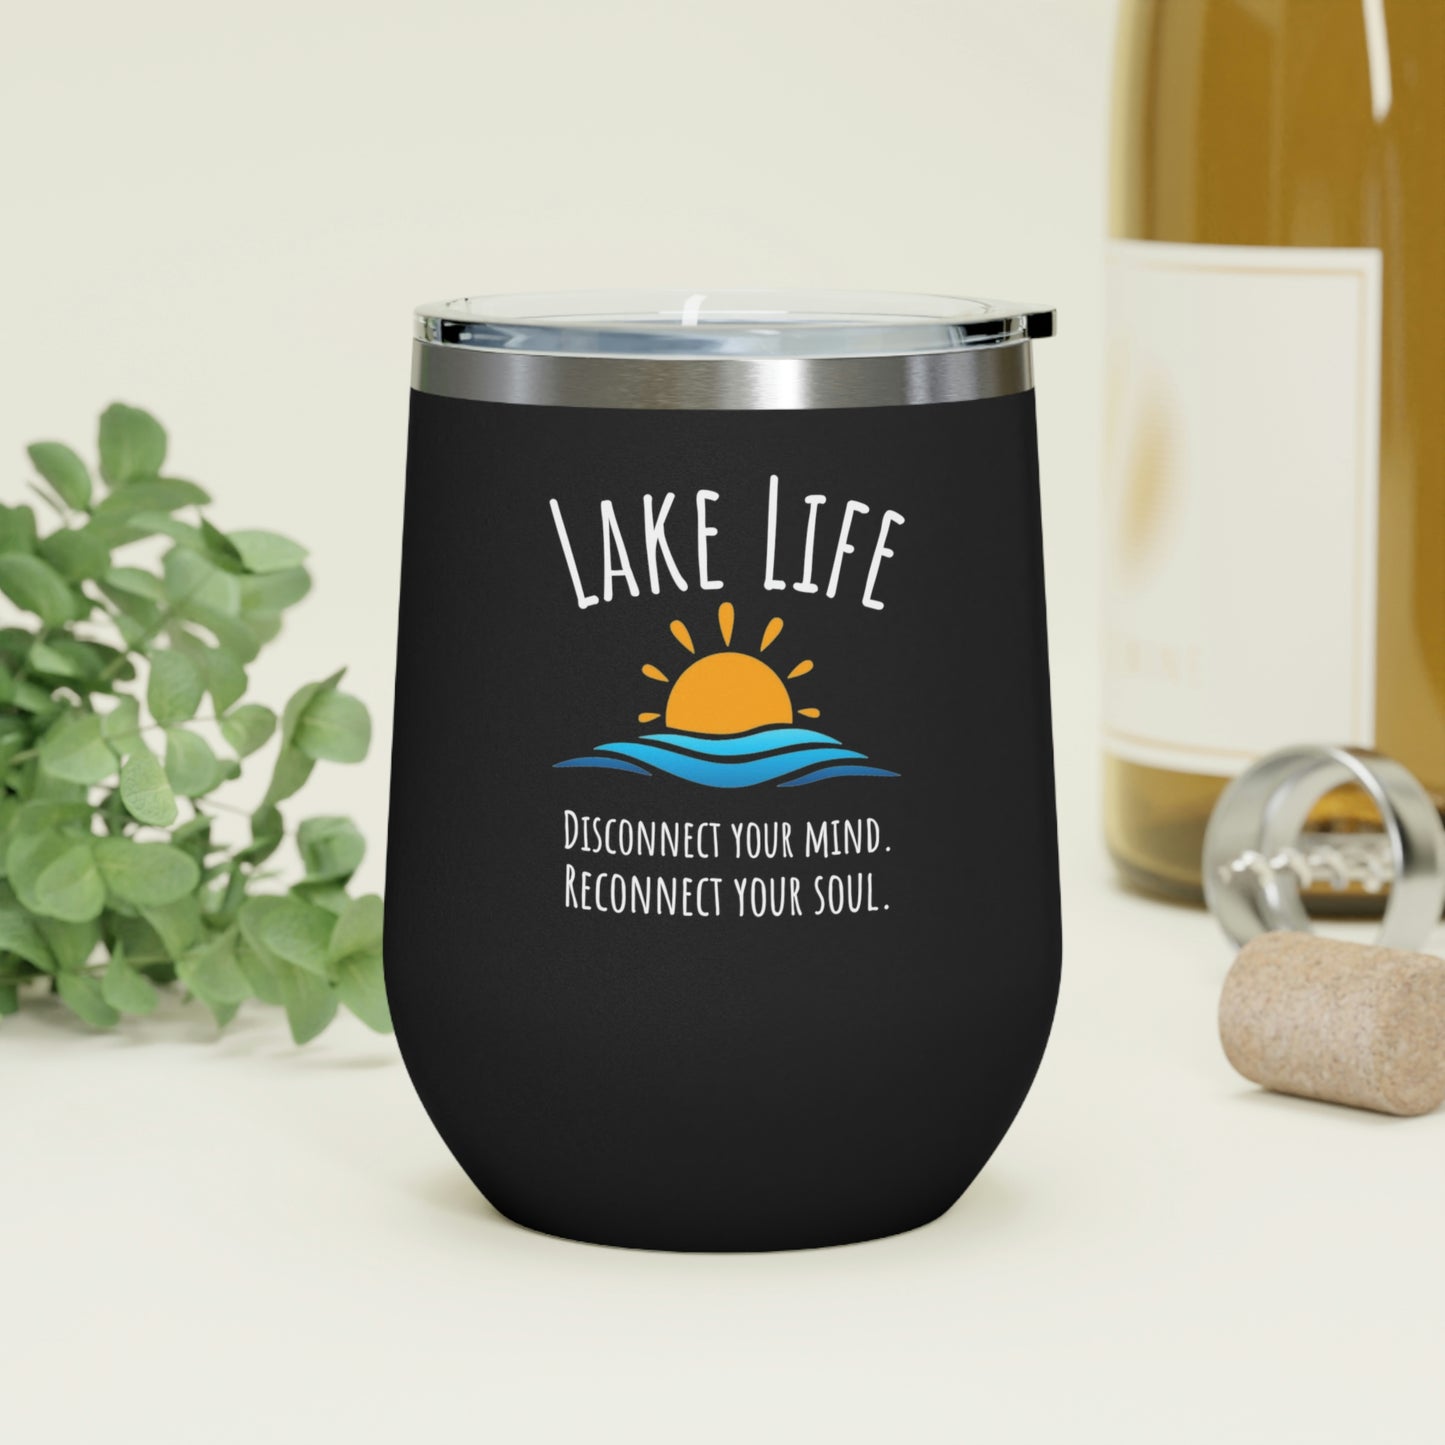 Lake Life - Disconnect your mind. Reconnect your soul. 12oz Insulated Wine Tumbler